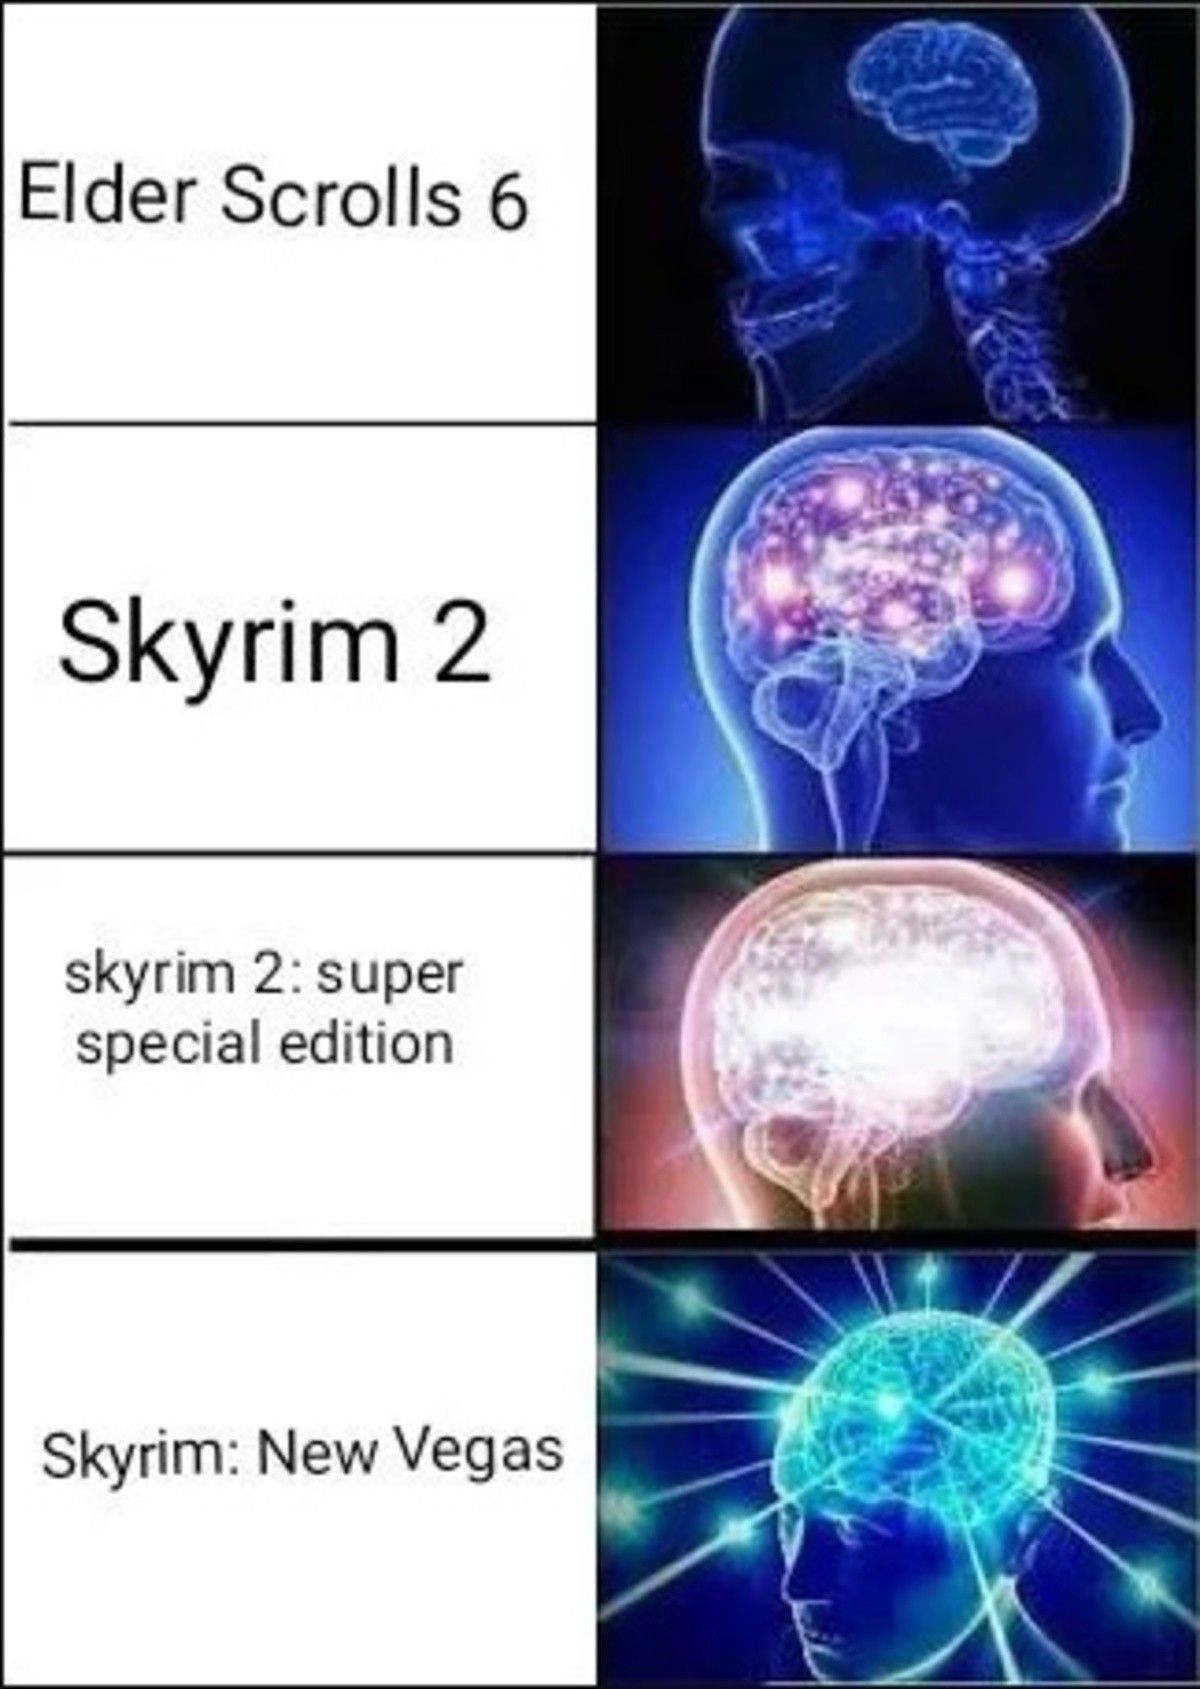 And it's just skyrim again